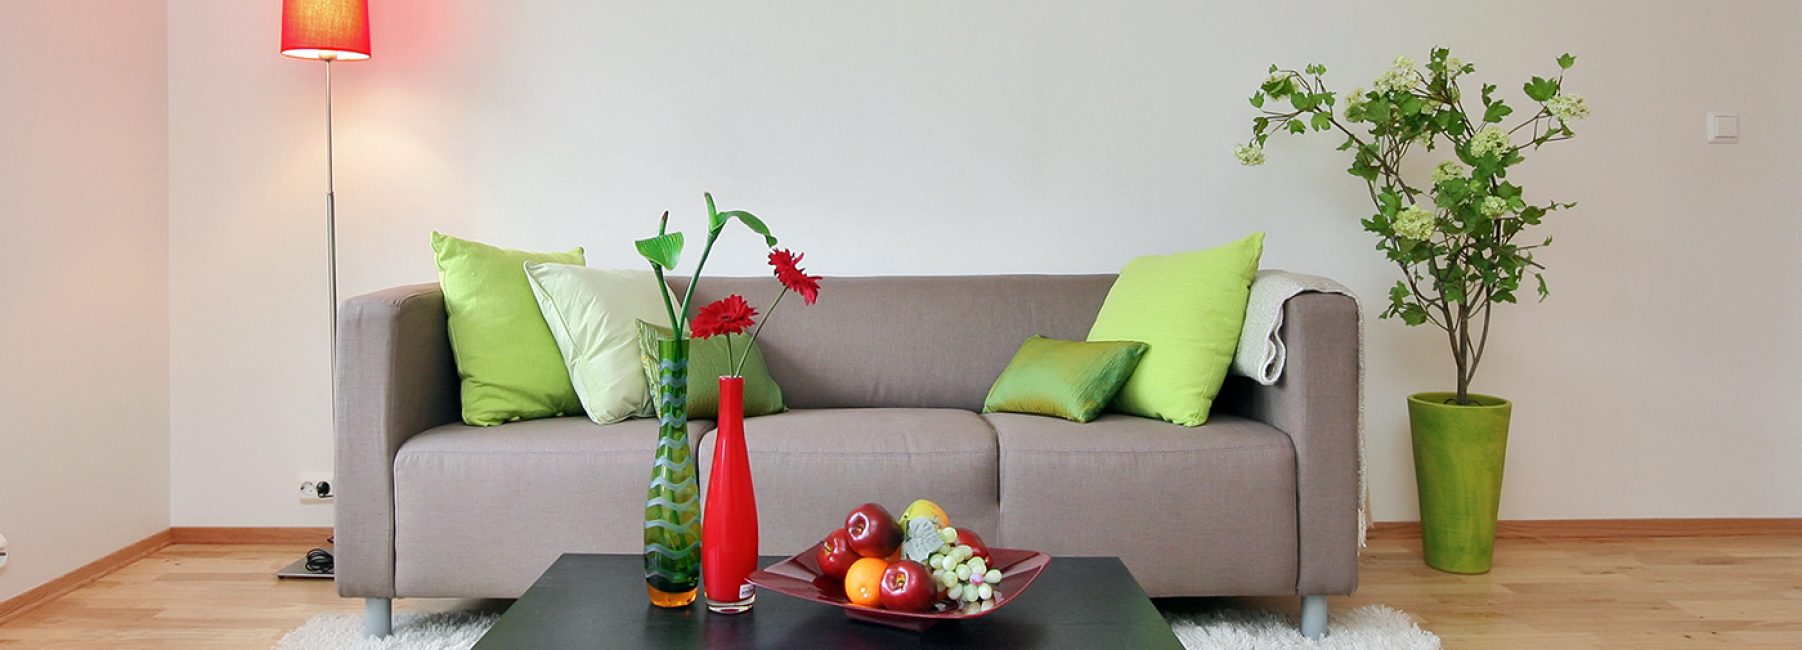 Plants help revive the living room